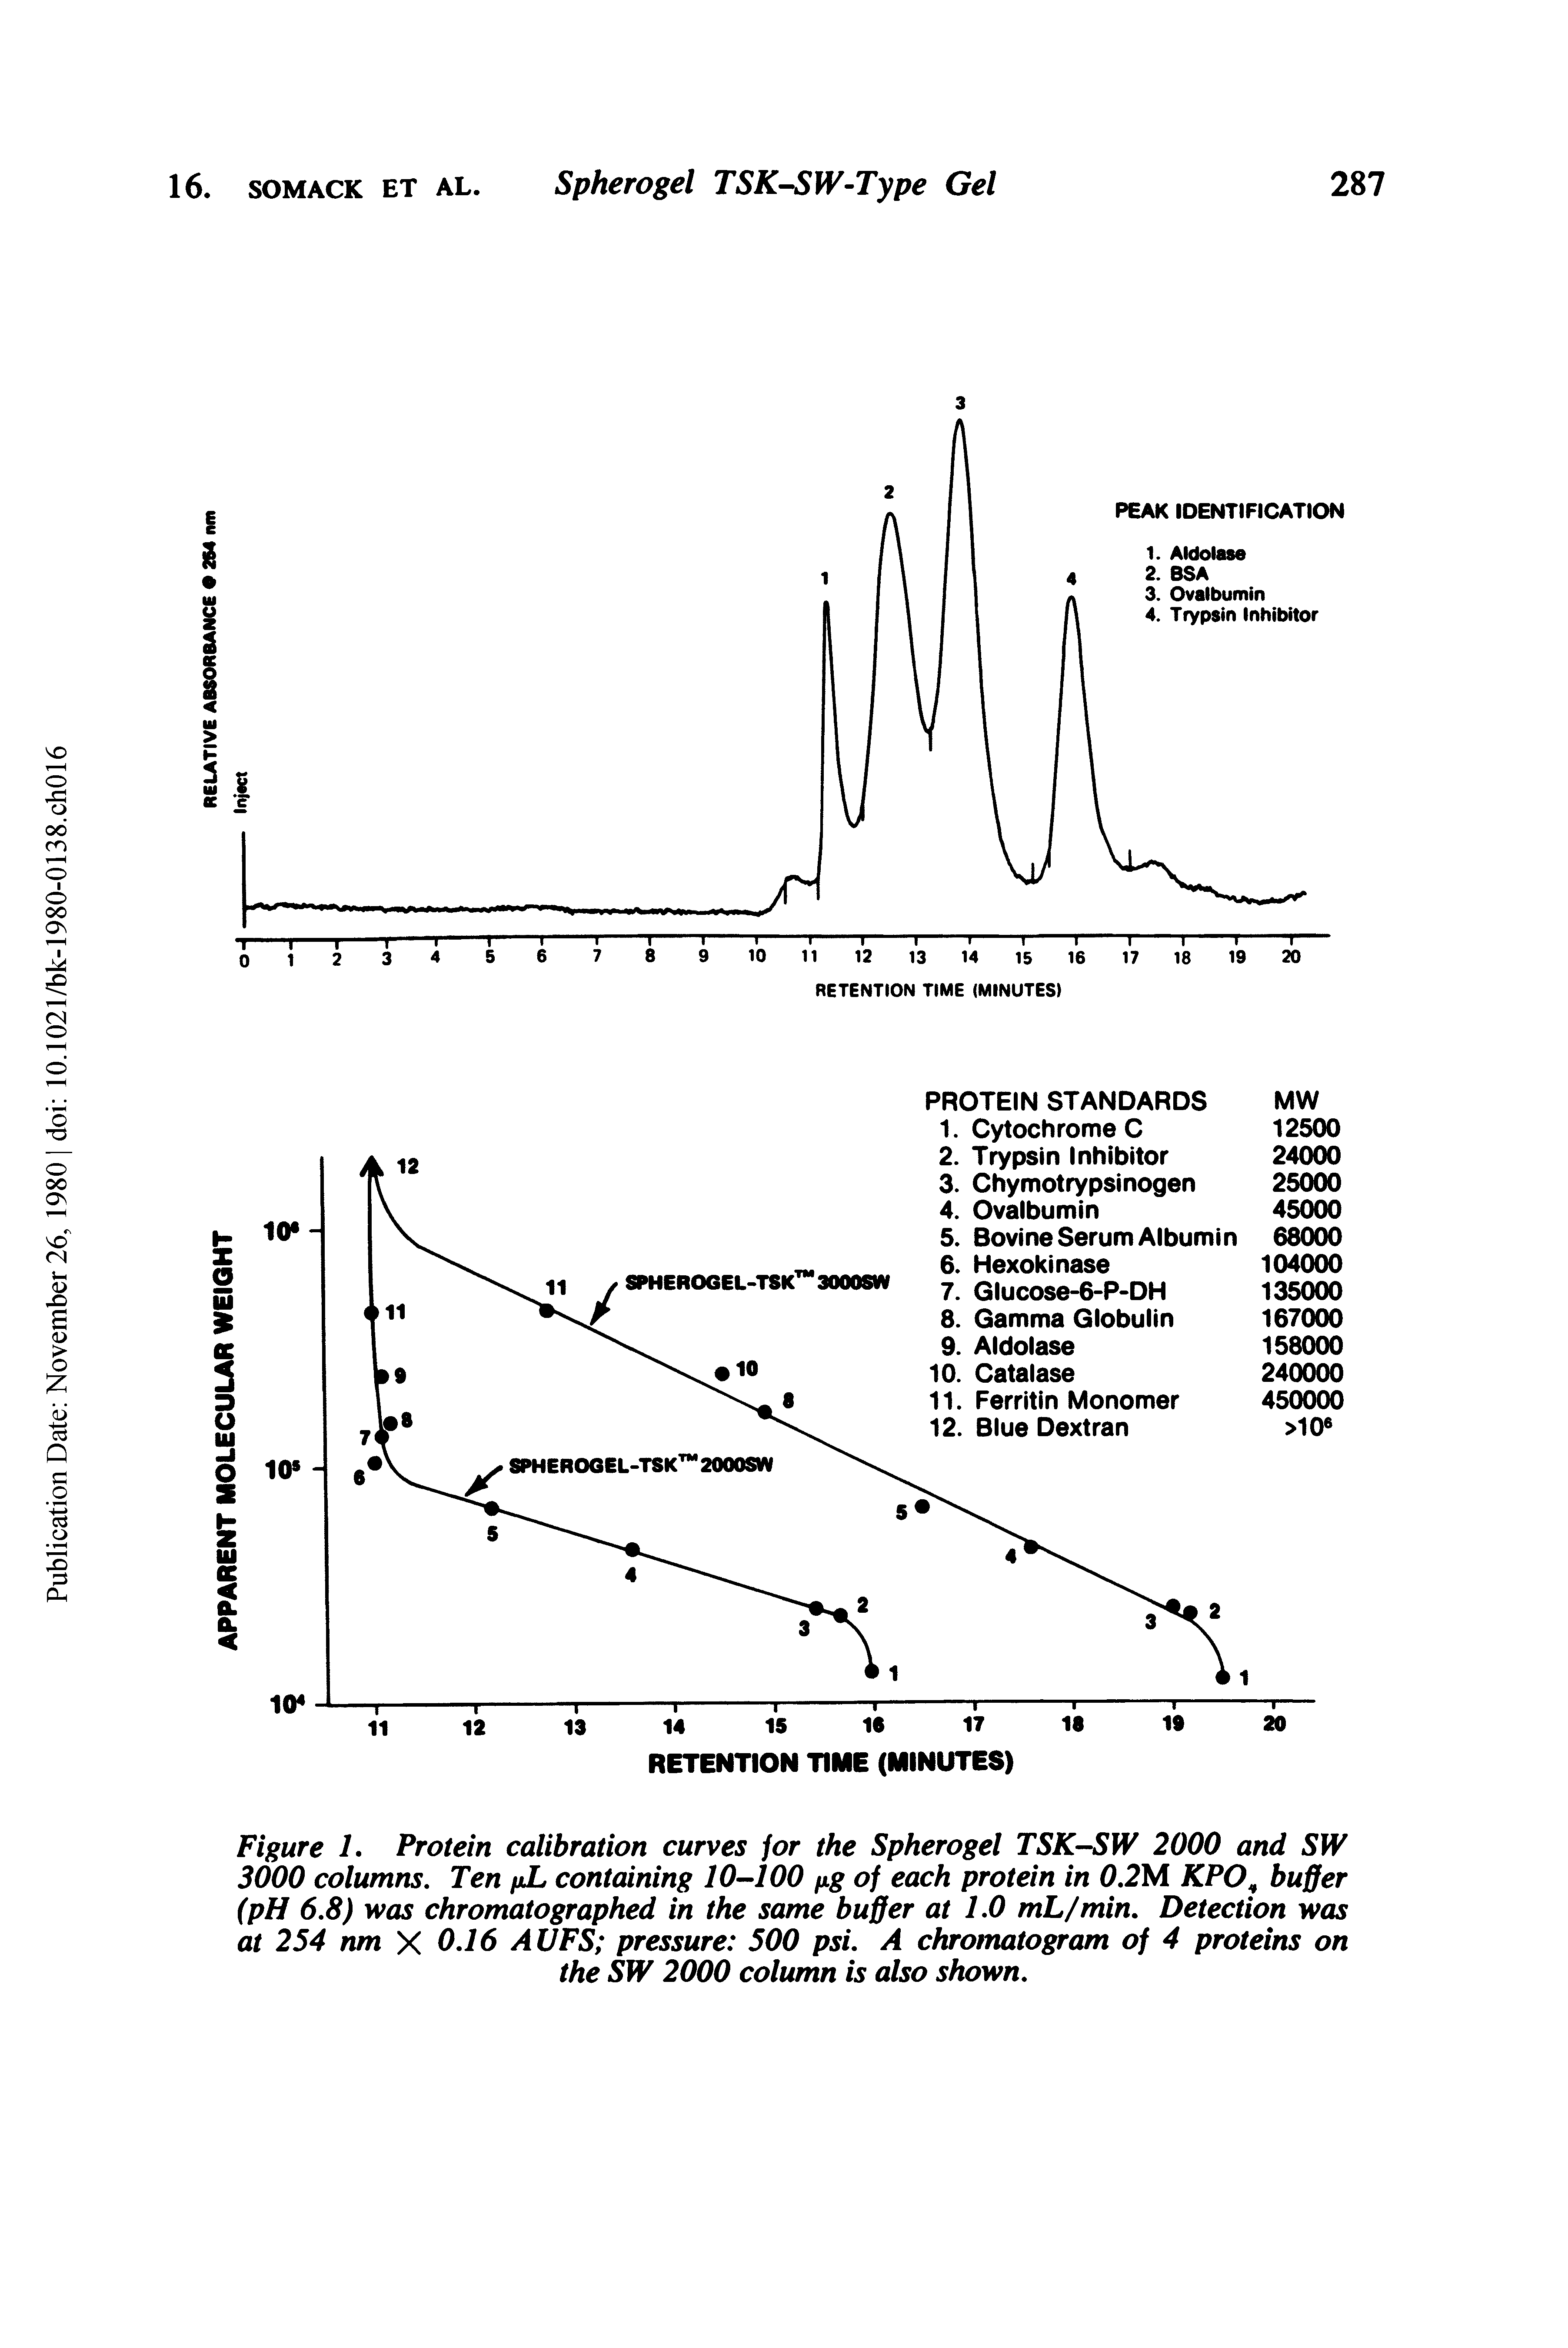 Figure 1. Protein calibration curves for the Spherogel TSK-SW 2000 and SW 3000 columns. Ten fiL containing 10--100 fig of each protein in 0,2M KPO buffer (pH 6.8) was chromatographed in the same buffer at 1.0 mL/min. Detection was at 254 nm X 0.16 AUFS pressure 500 psi. A chromatogram of 4 proteins on the SW 2000 column is also shown.